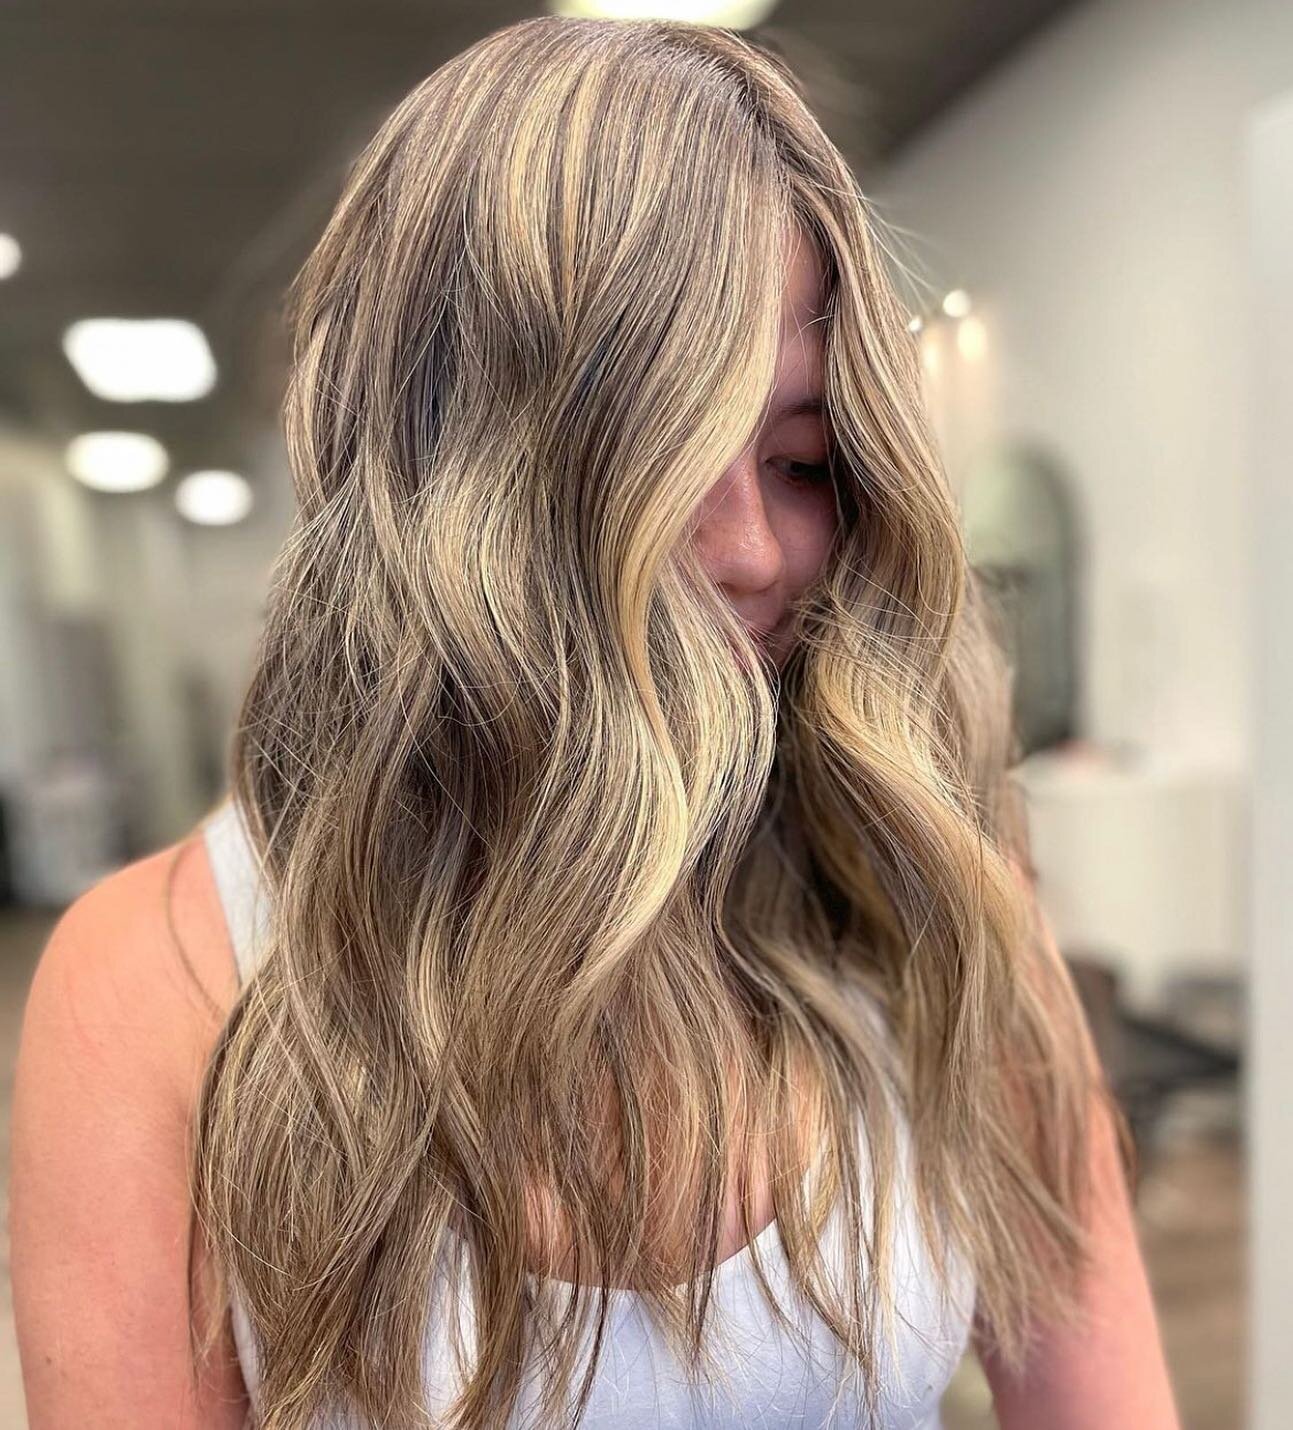 @queenofshears is not just a color master but her cuts are 💯
.
.
.
.
.
. . . . . . . #dimensionalbalayage #olaplex #btcpics #redken #hairtransformation #licensedtocreate #hairofinstagram #haircutsseattle #balayage #modernsalom  #haircutsseattle #bal